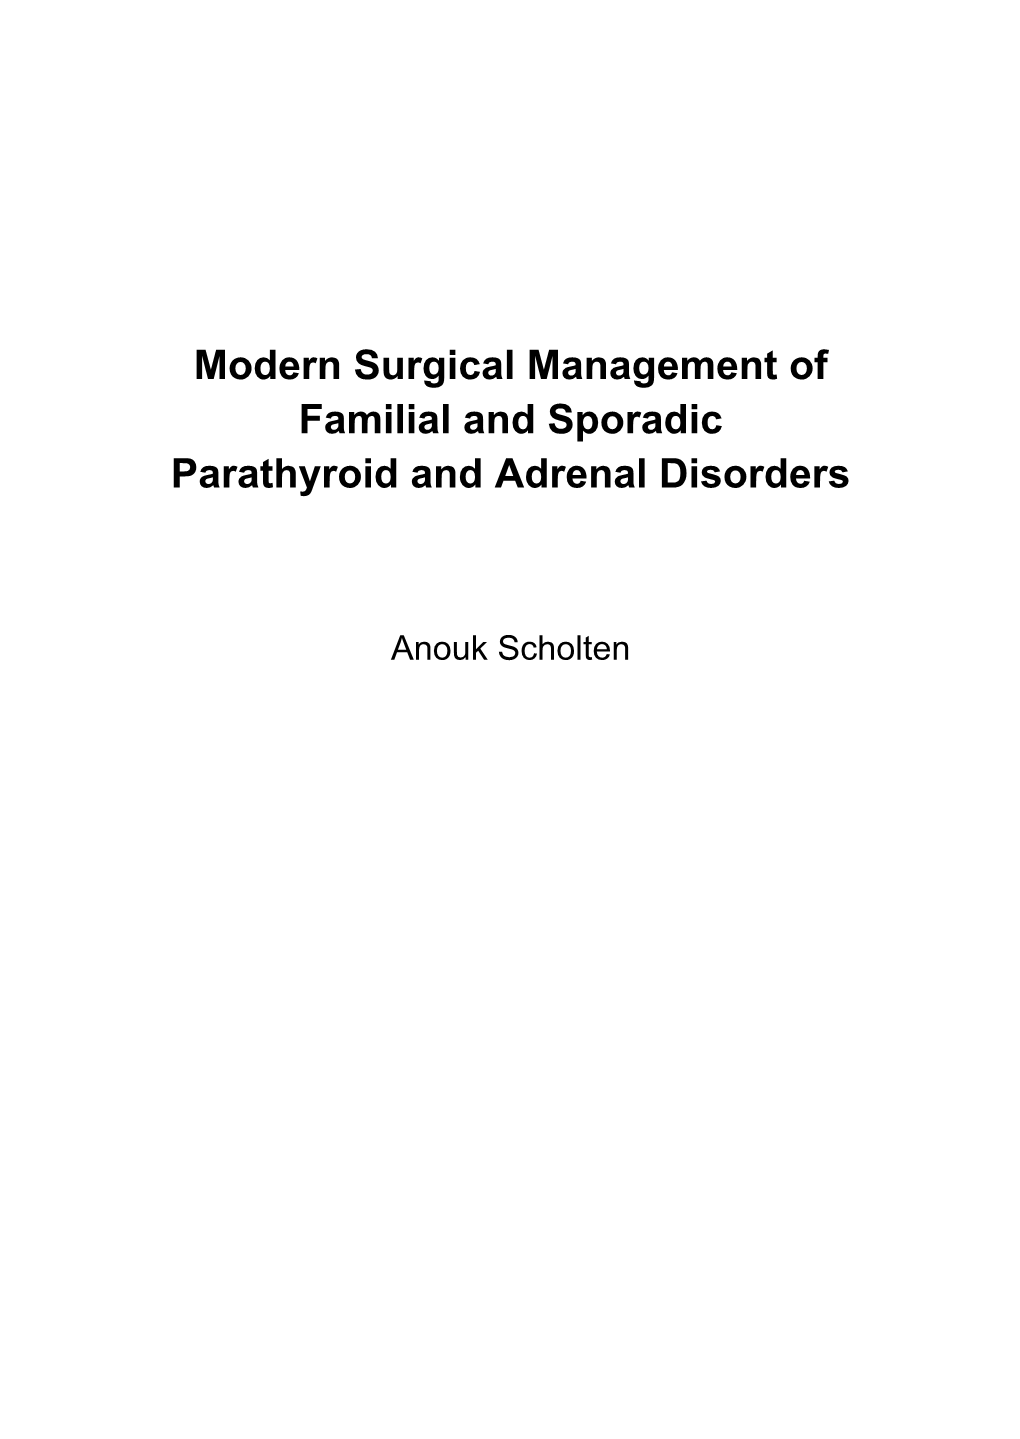 Modern Surgical Management of Familial and Sporadic Parathyroid and Adrenal Disorders